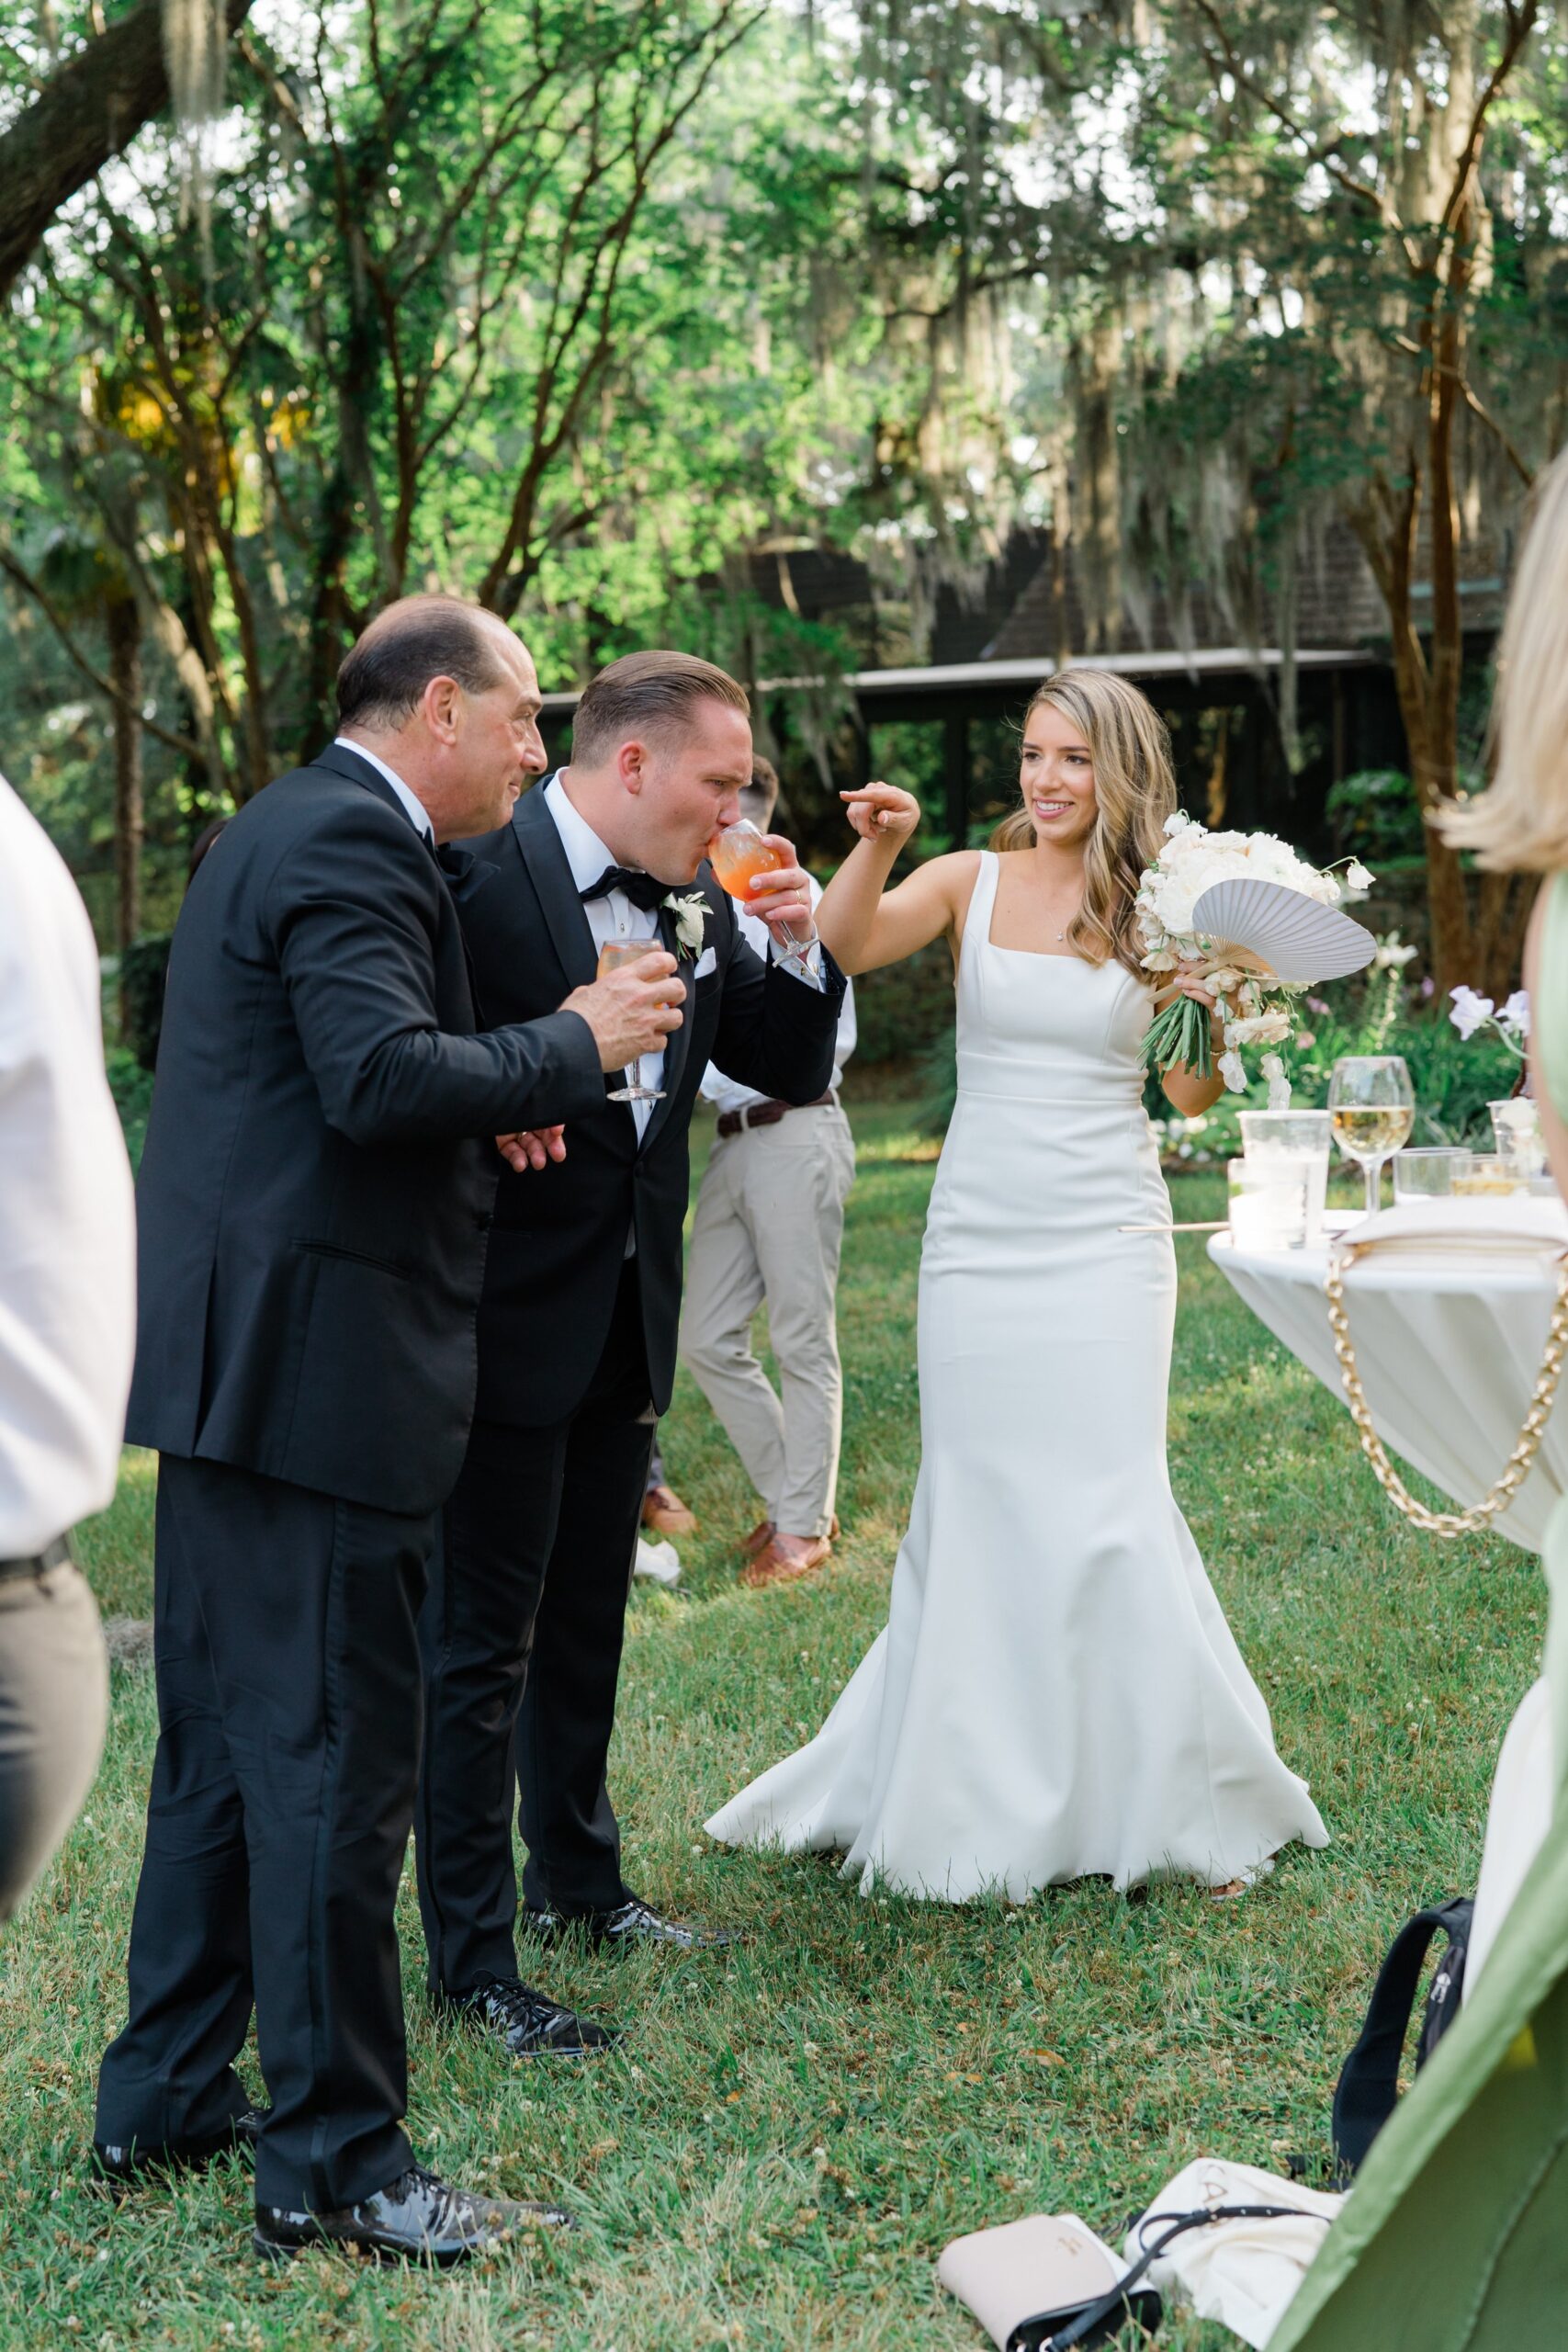 Fun moment with bride, groom, and father of the bride at Crane Pond cocktail hour. Charleston wedding photographer.